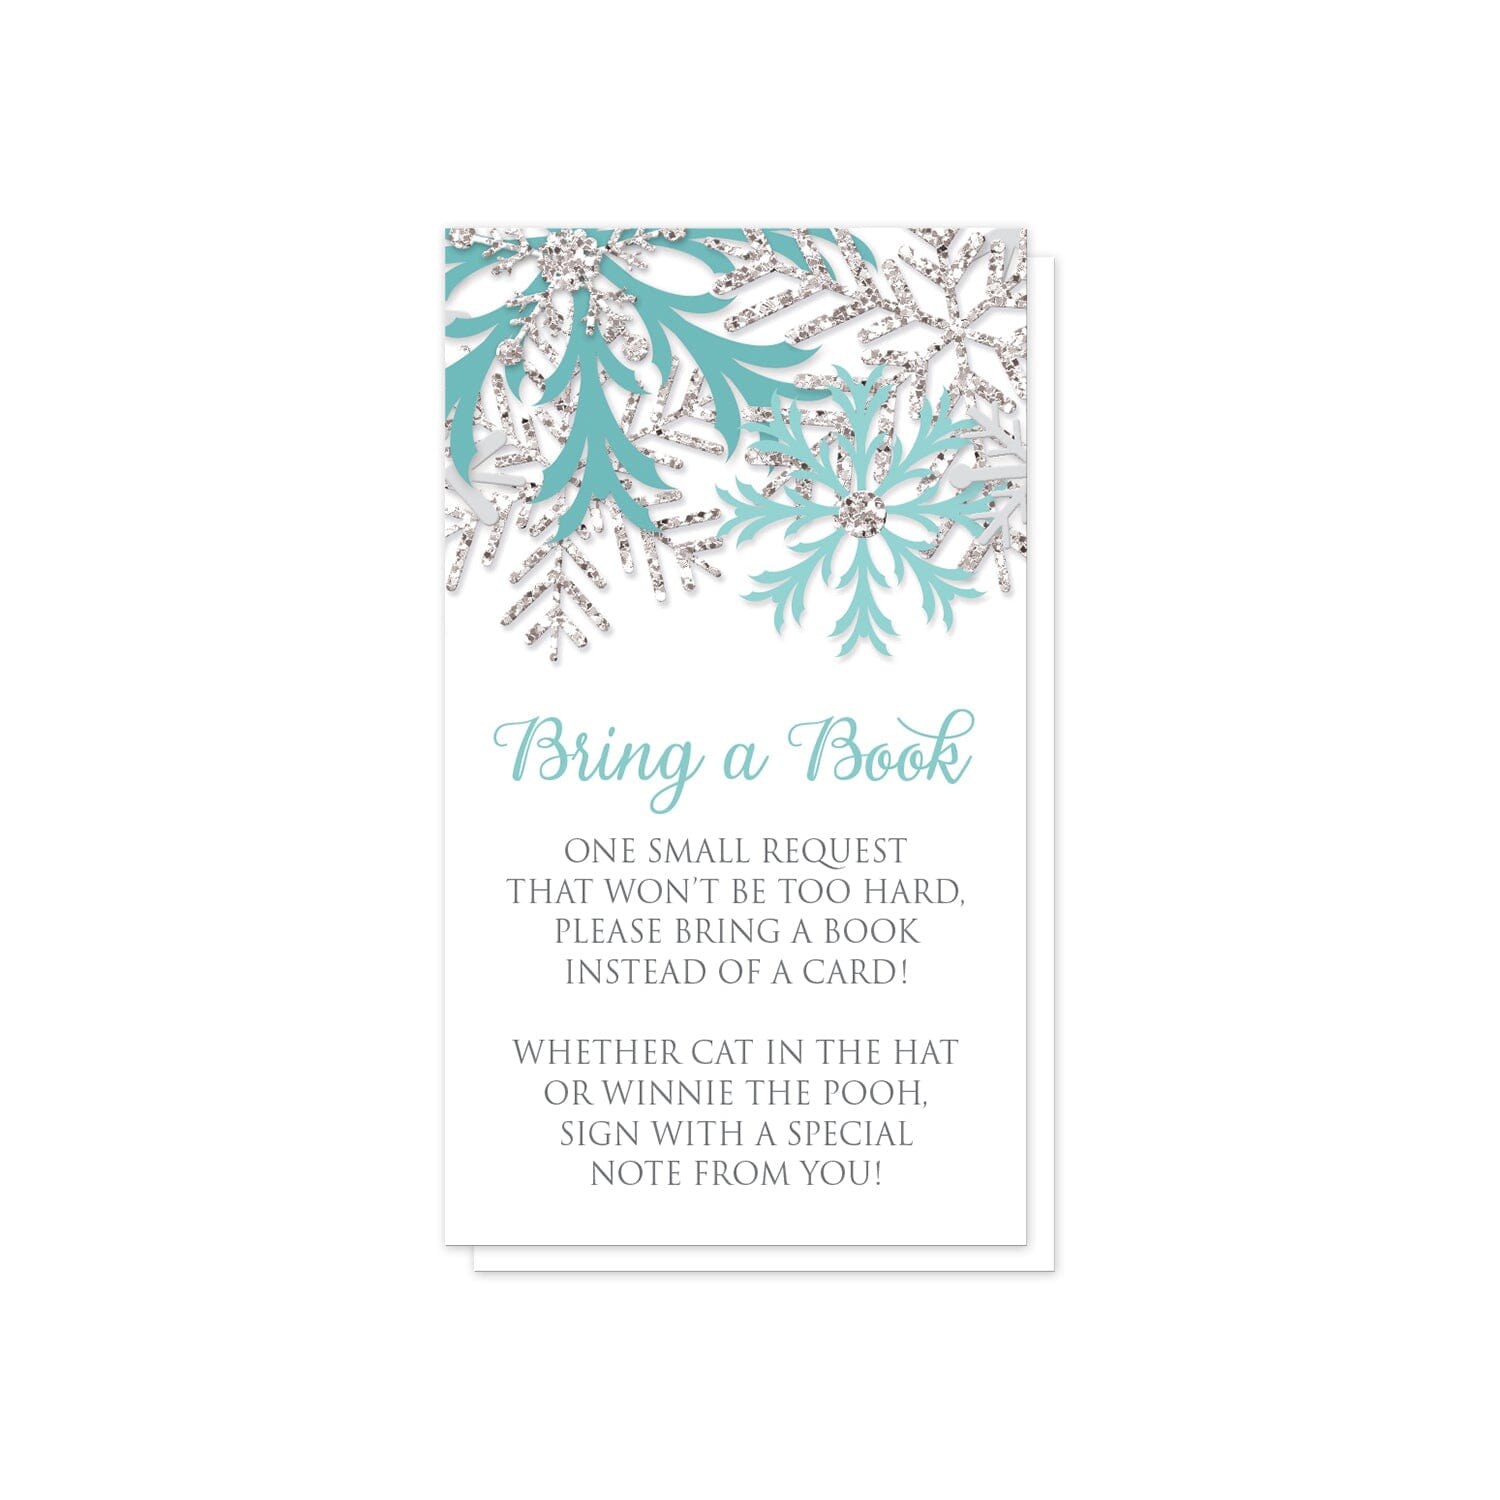 Winter Teal Silver Snowflake Bring a Book Cards at Artistically Invited. Pretty winter teal silver snowflake bring a book cards designed with teal, light teal, and silver-colored glitter-illustrated snowflakes along the top. Your book request details are printed in teal and gray over white below the snowflakes.